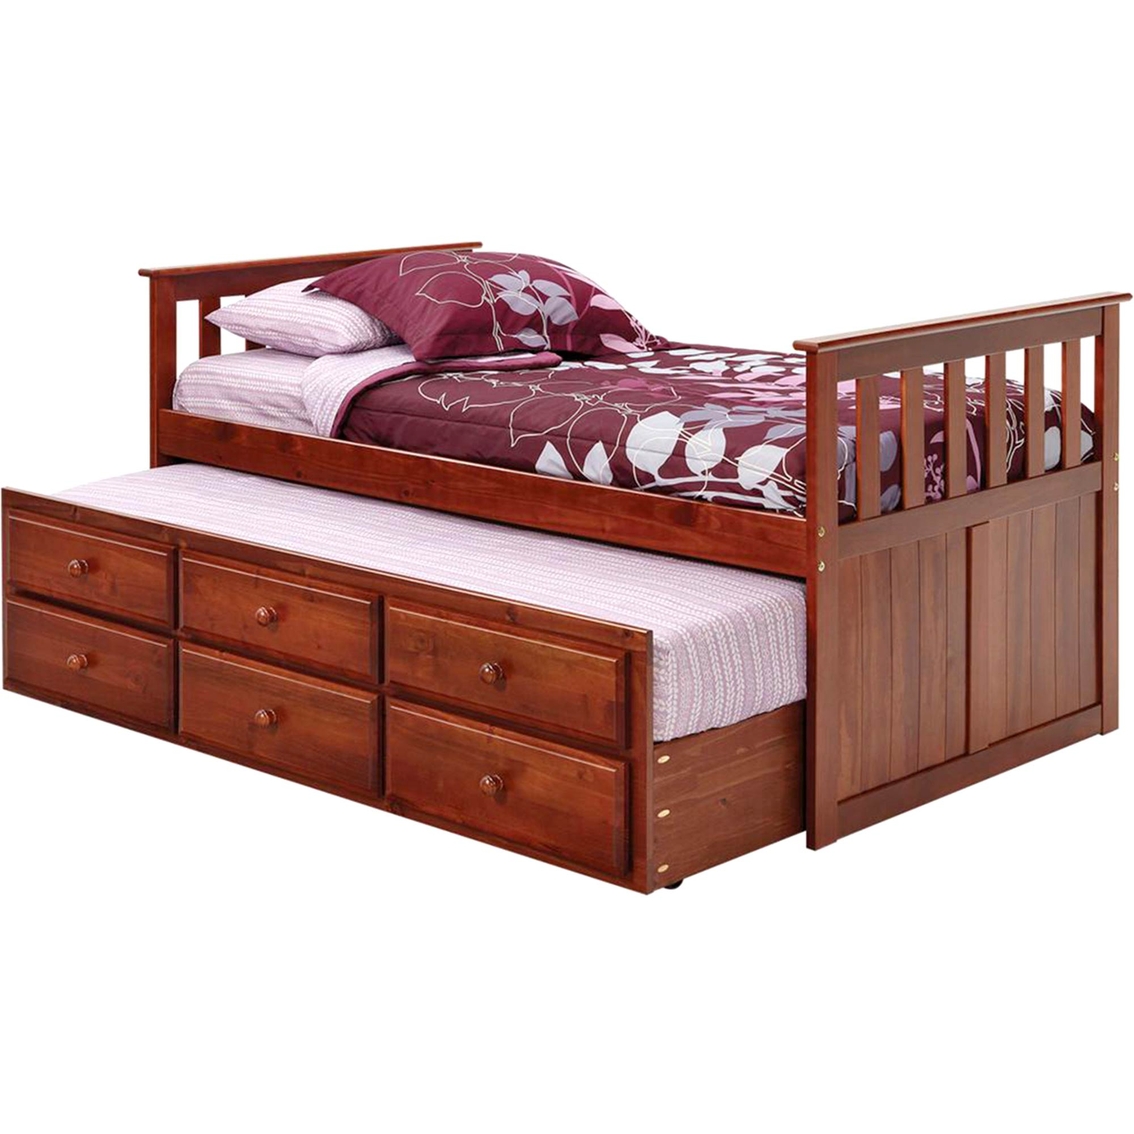 Bed With Trundle Storage Dark, Mission Style Twin Bed